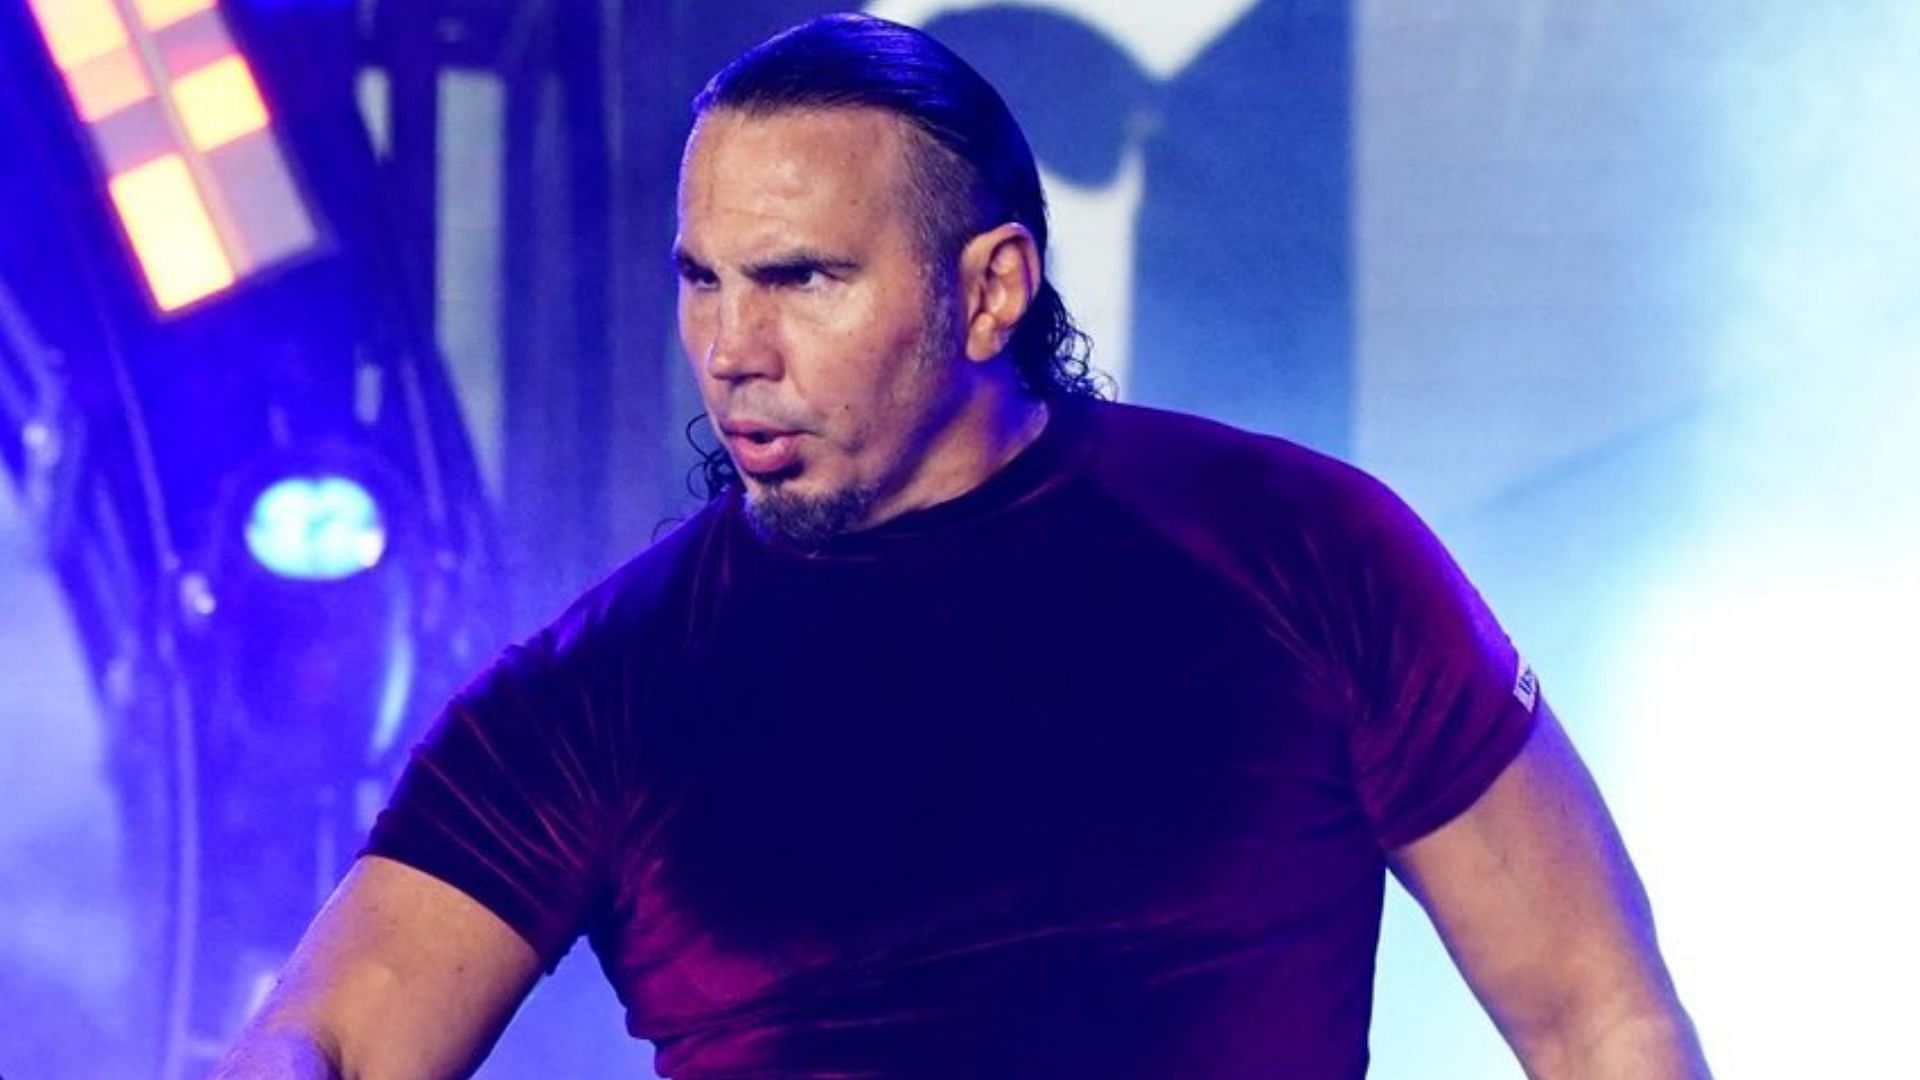 Matt Hardy making his entrance at an AEW event!